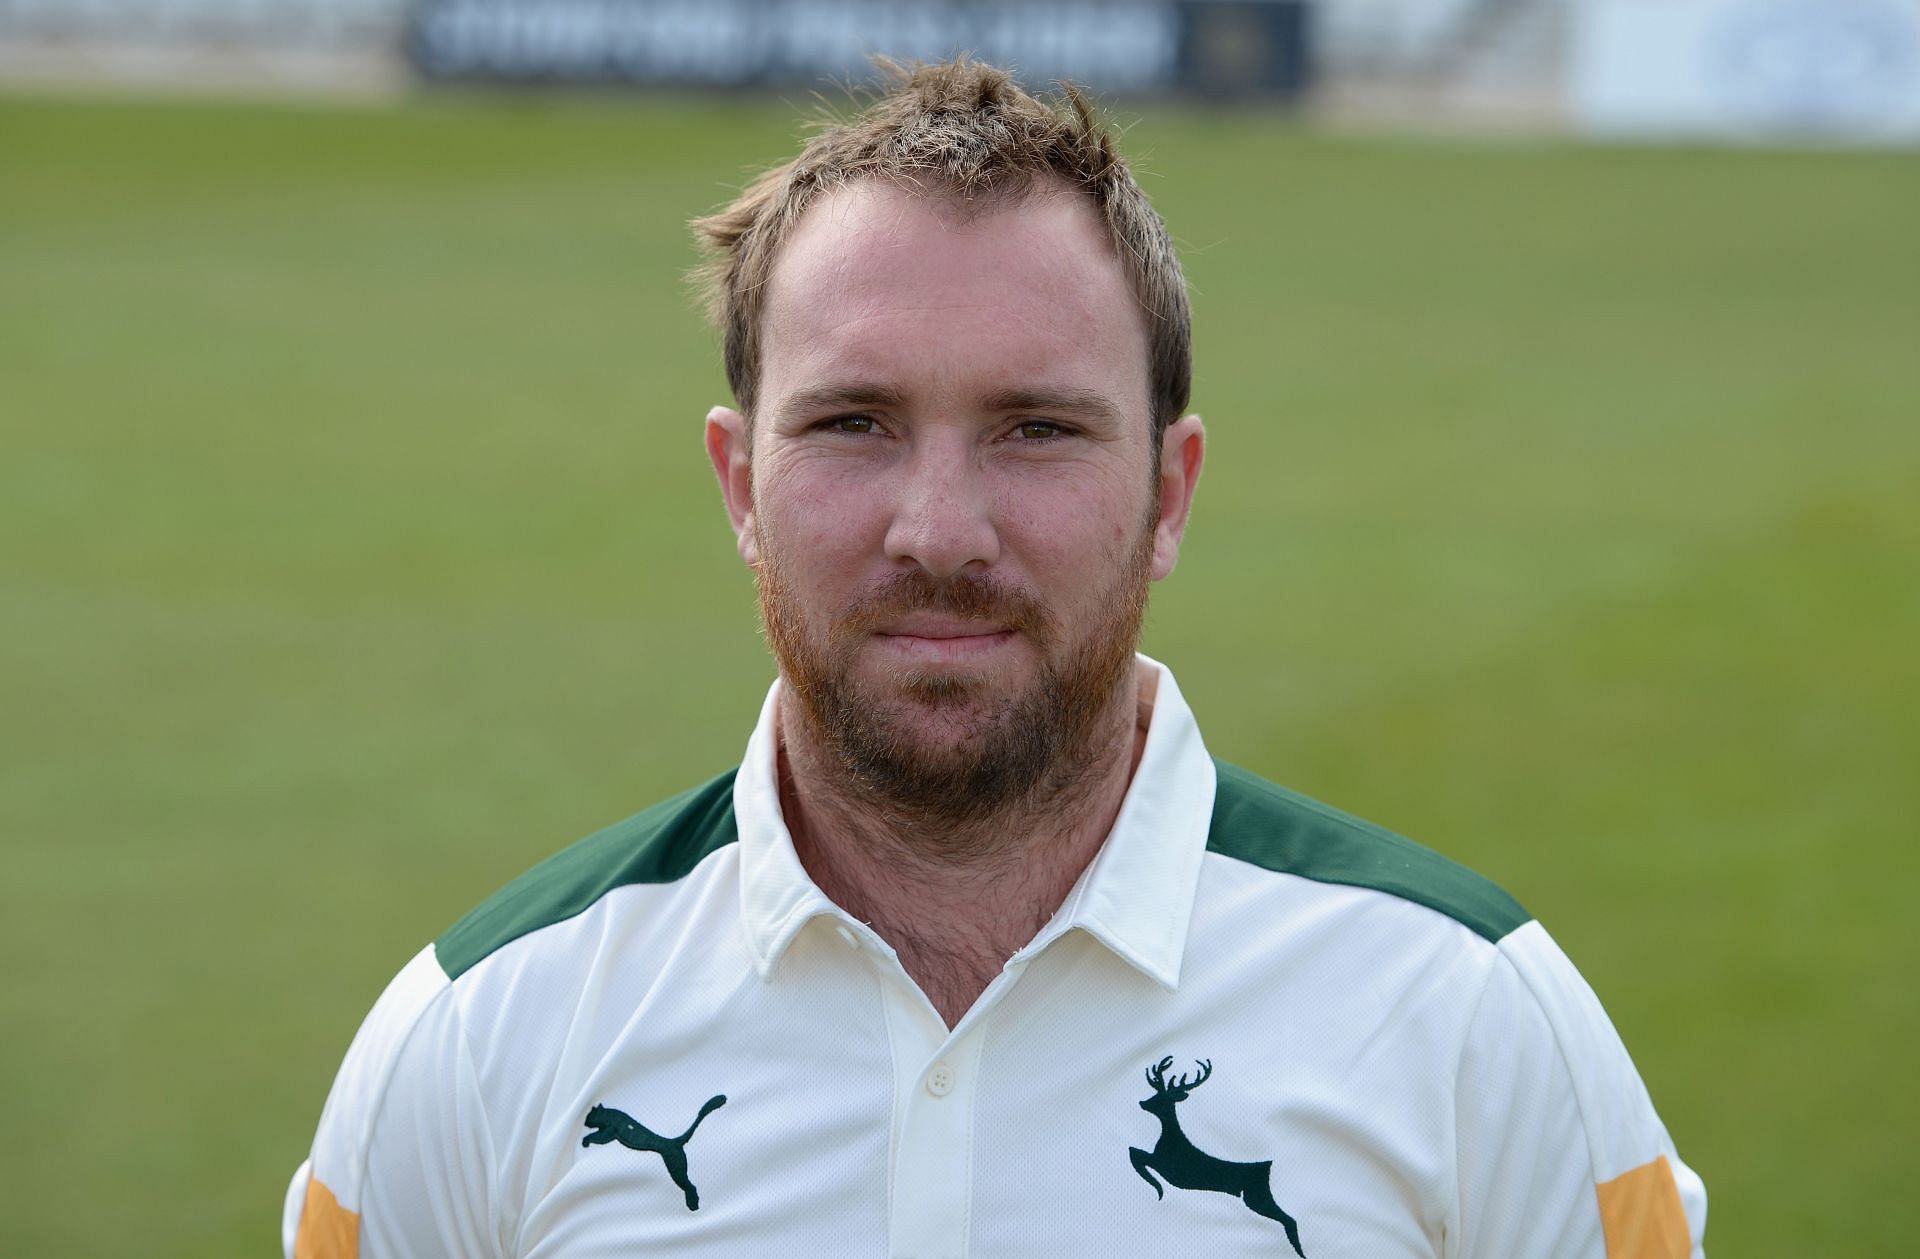 Brendan Taylor has been handed a three-and-a-half year ban by the ICC for anti-corruption and doping breaches.